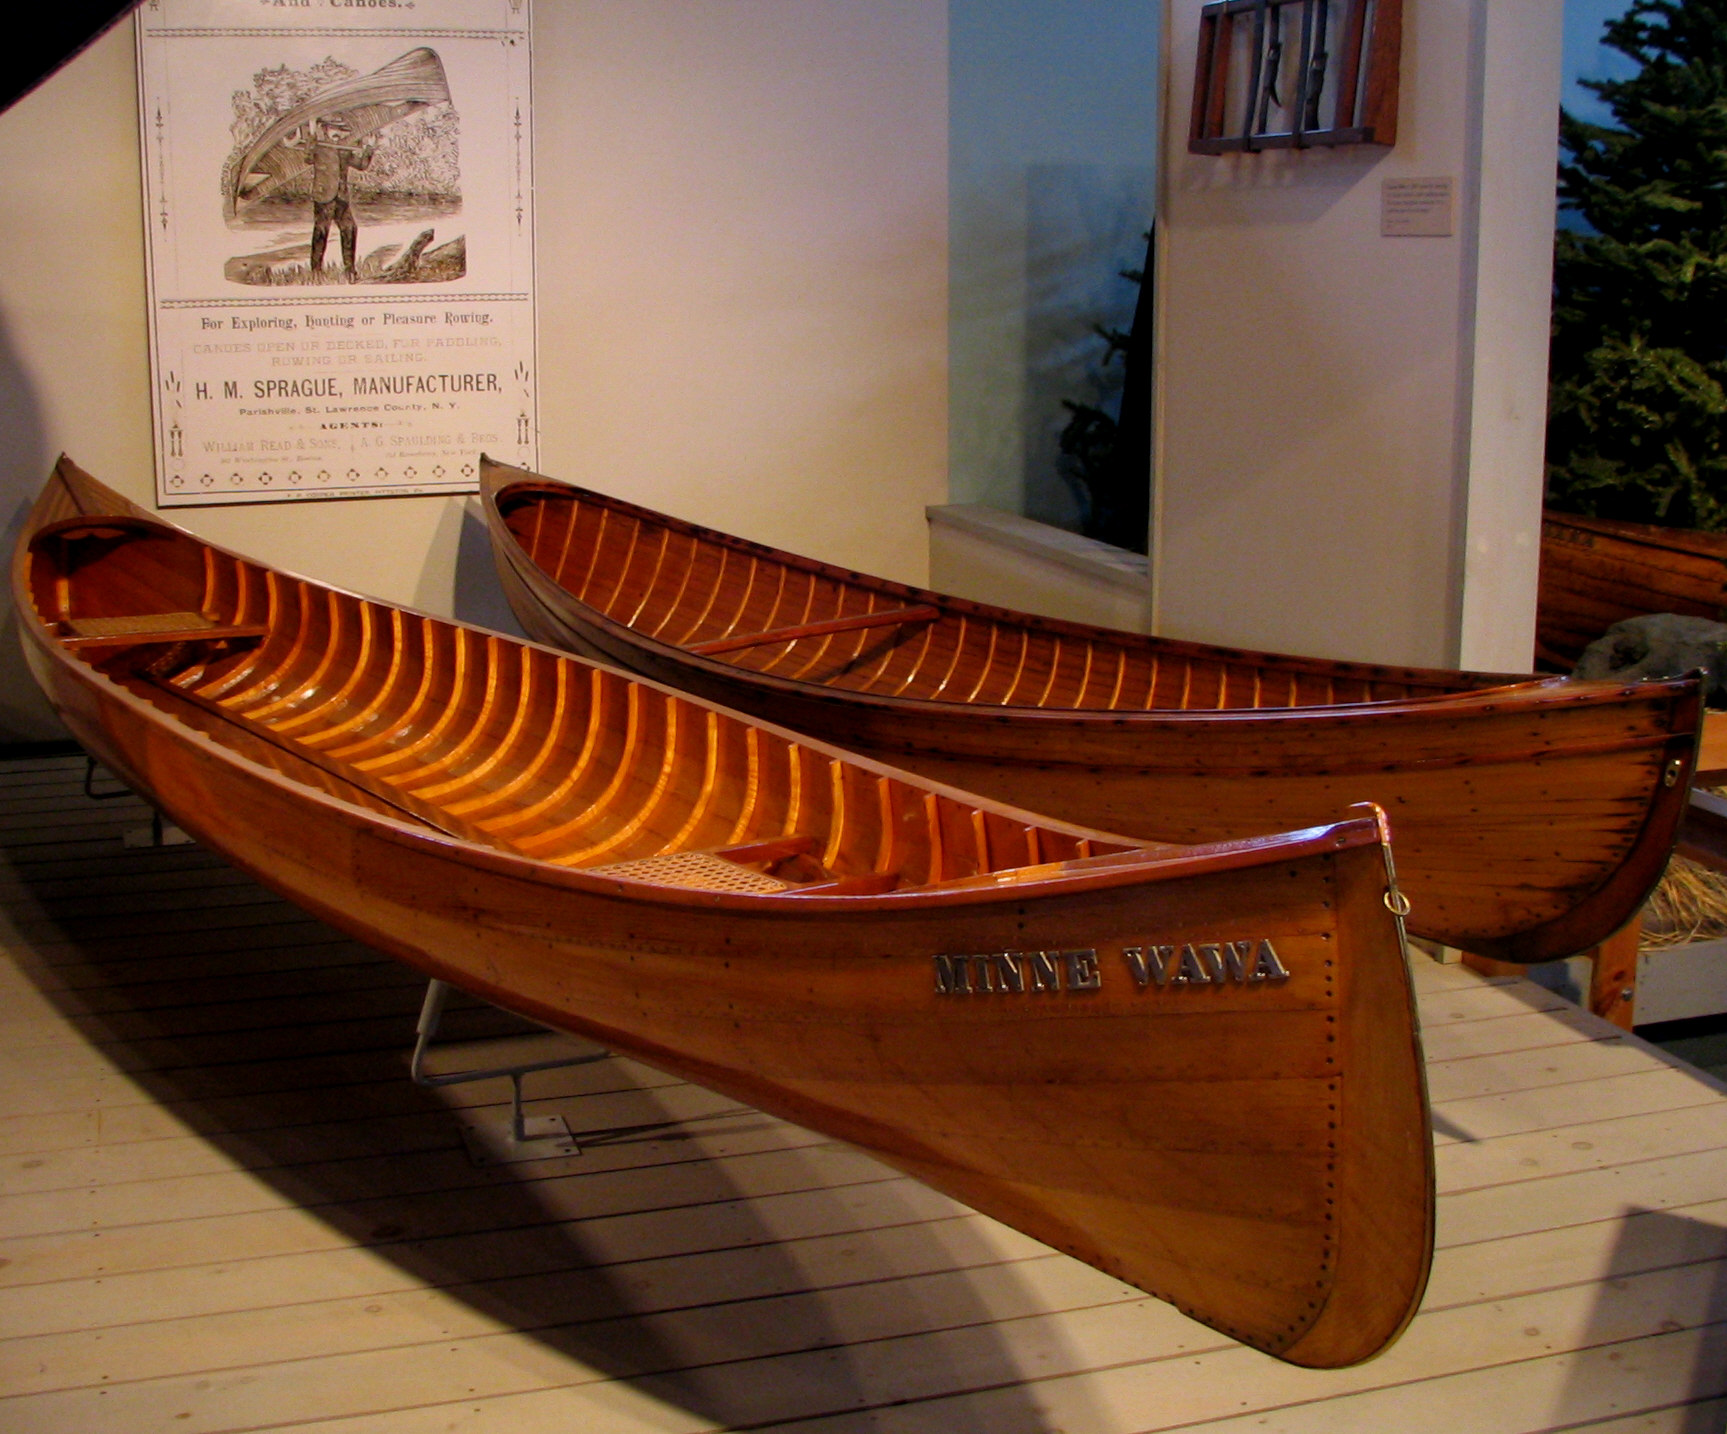 File:ADK Museum - Antique Strip-built Canoes.jpg - Wikimedia Commons